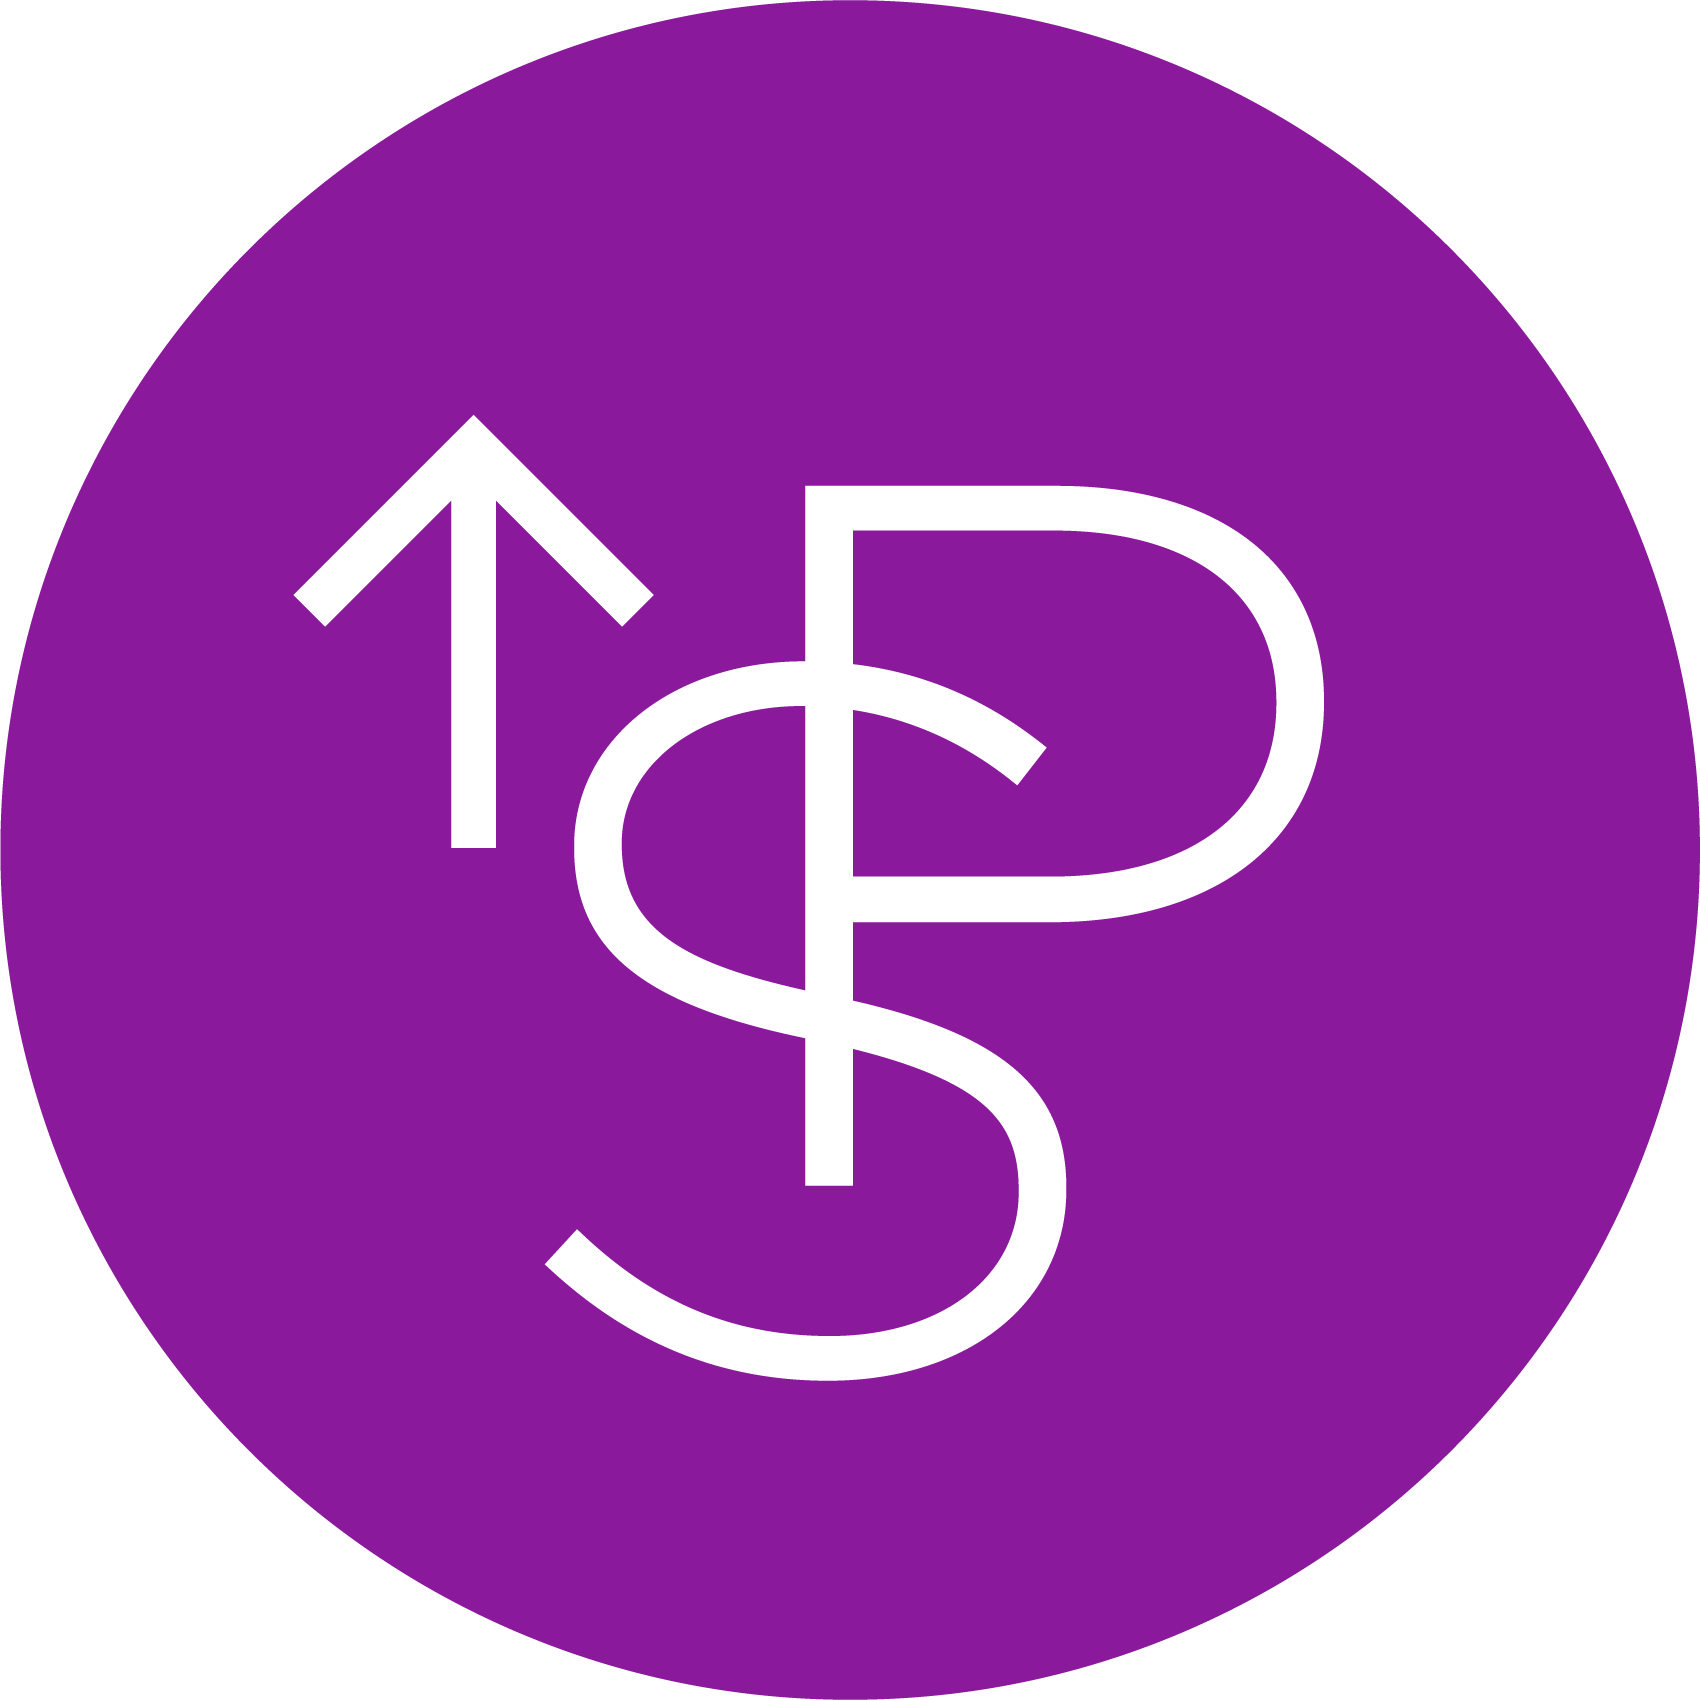 purple circle with white text "s & P" intertwined and arrow pointed upwards